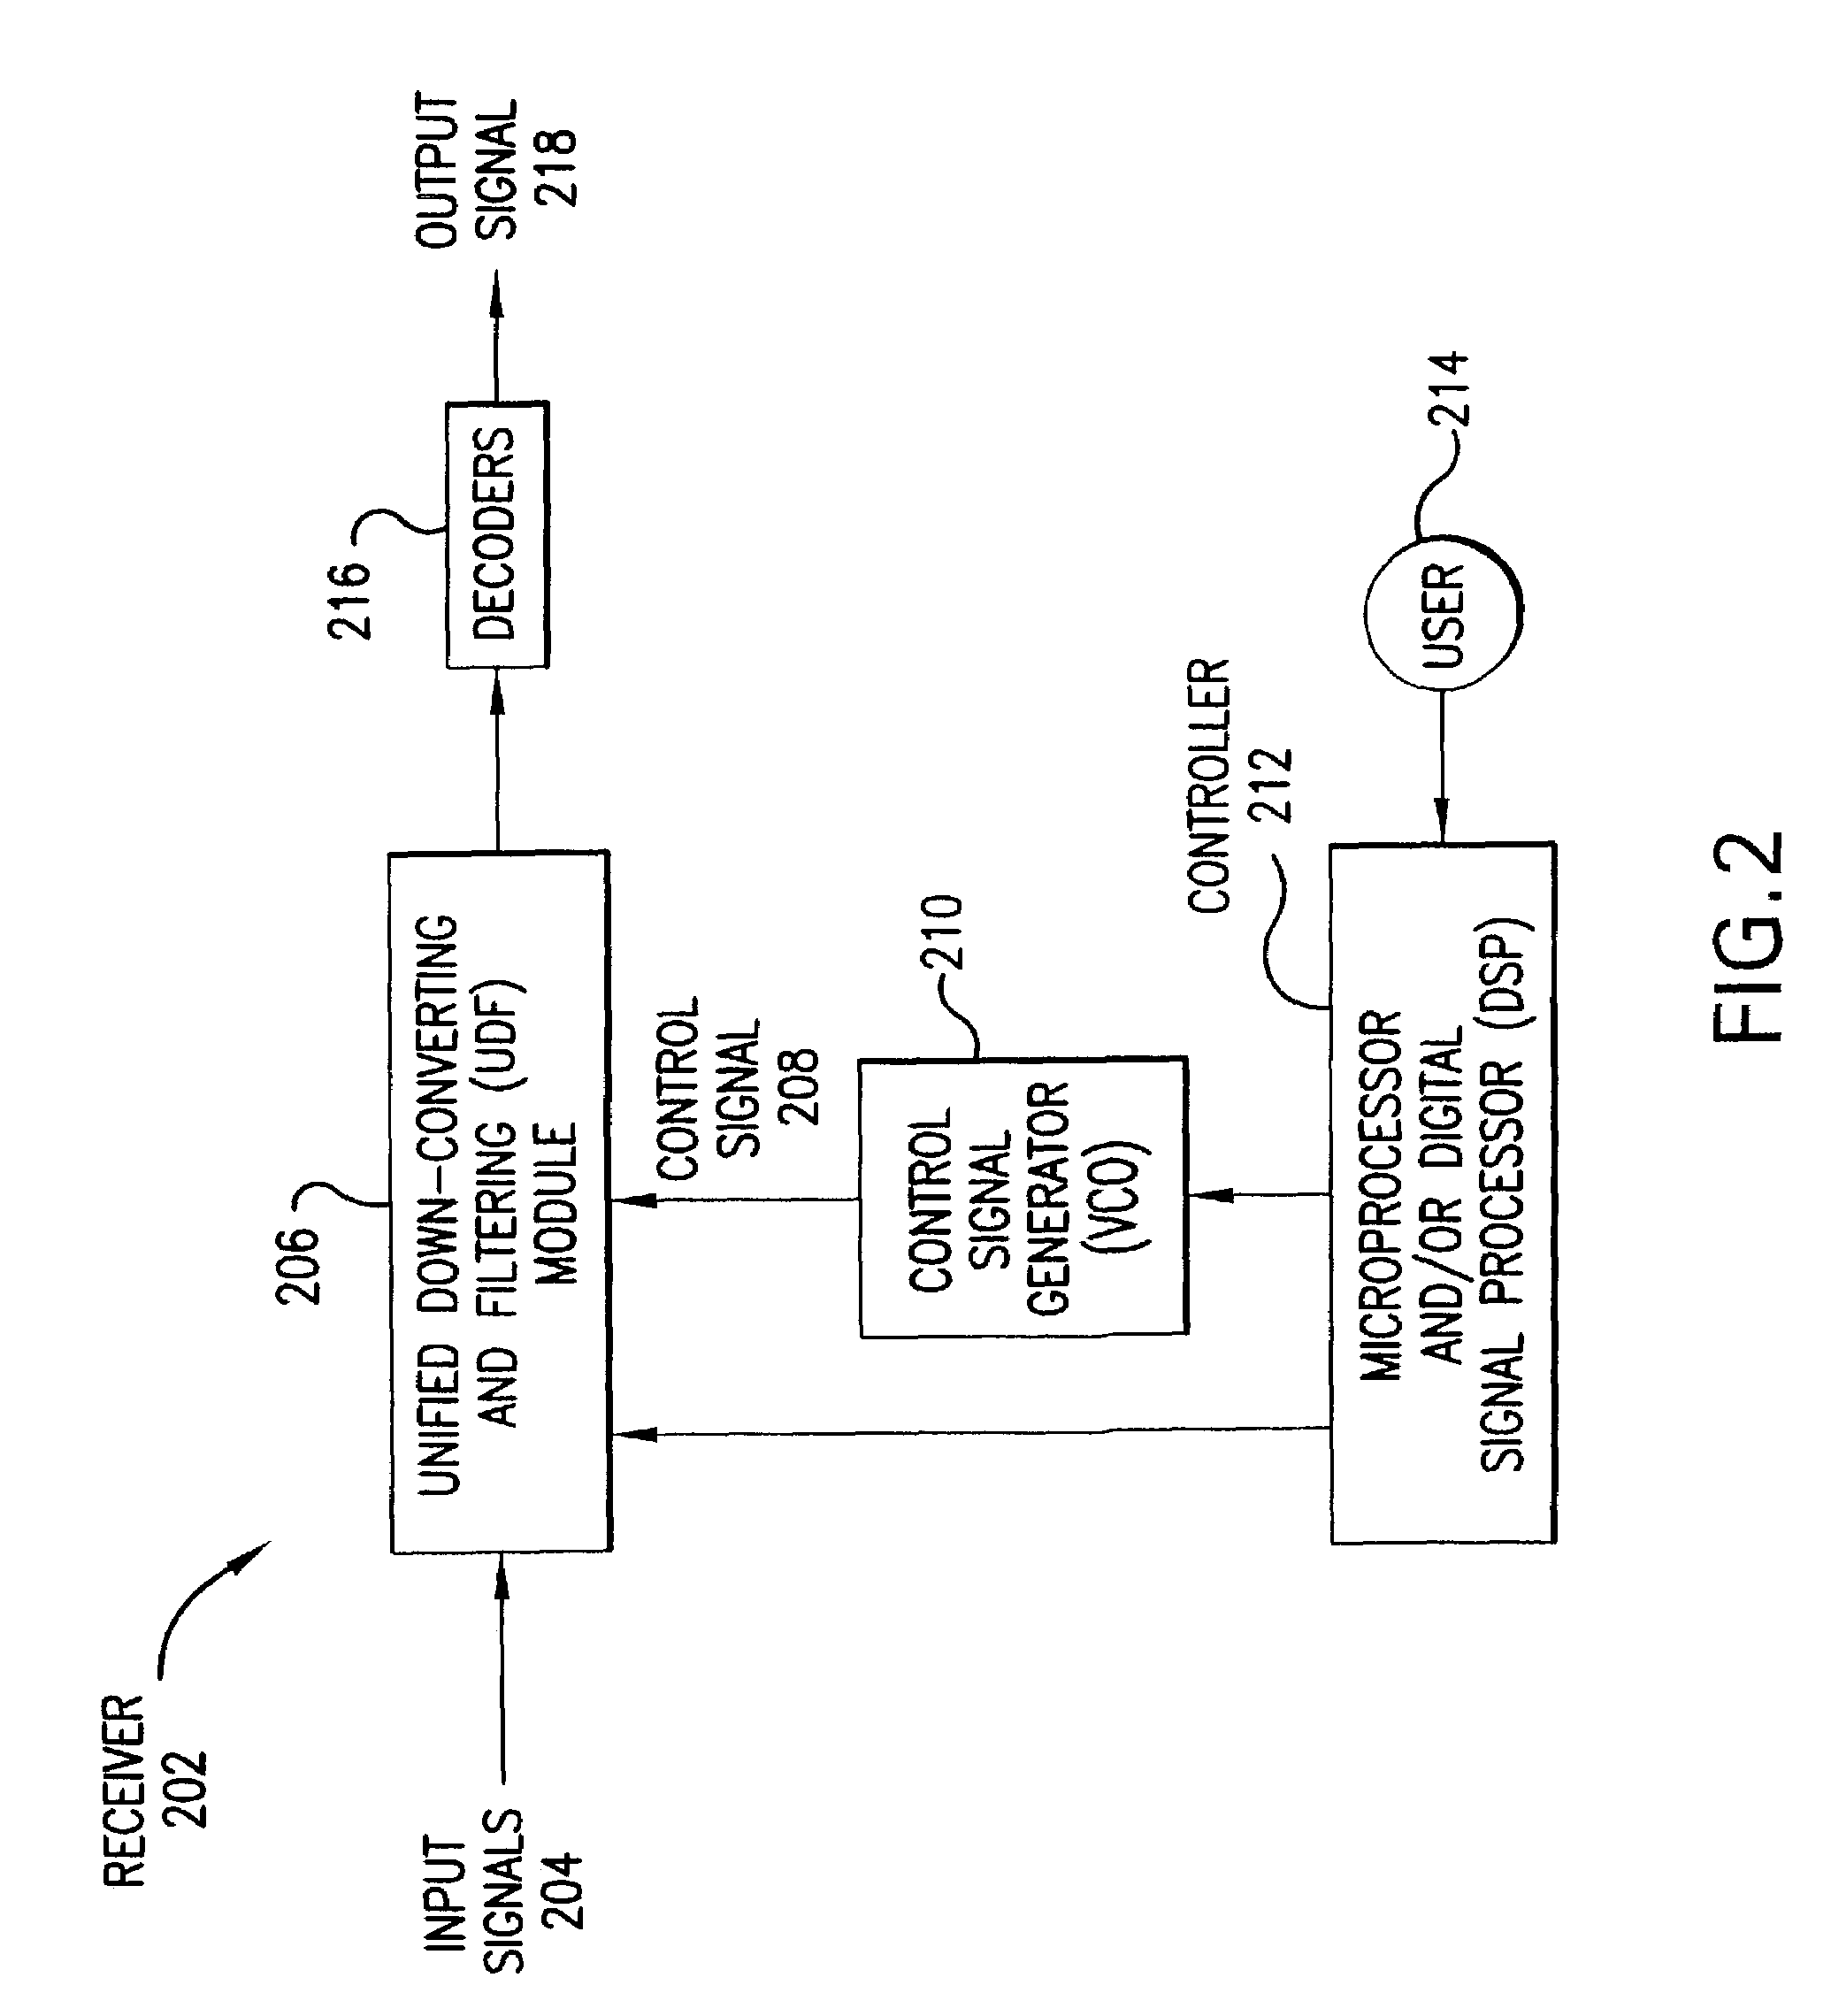 Aliasing communication system with multi-mode and multi-band functionality and embodiments thereof, such as the family radio service